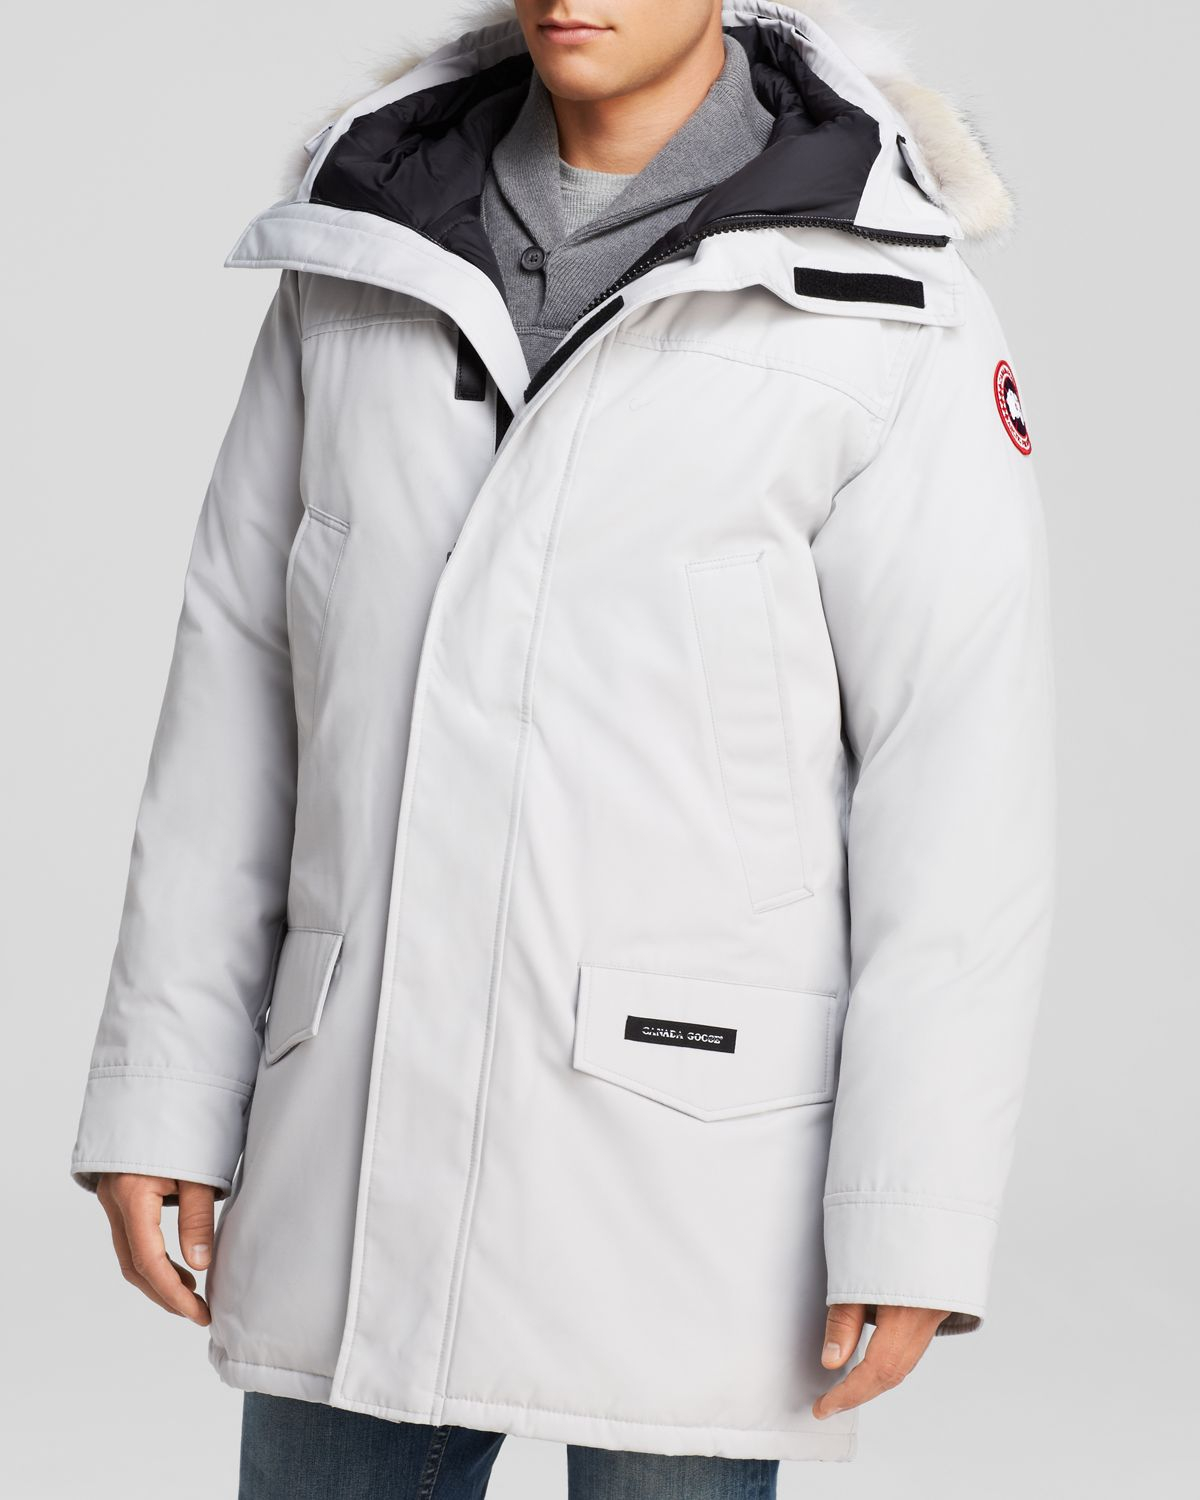 Canada Goose coats online discounts - Perfect Online Shop To Buy Canada Goose Vs Geese New Styles & Colors